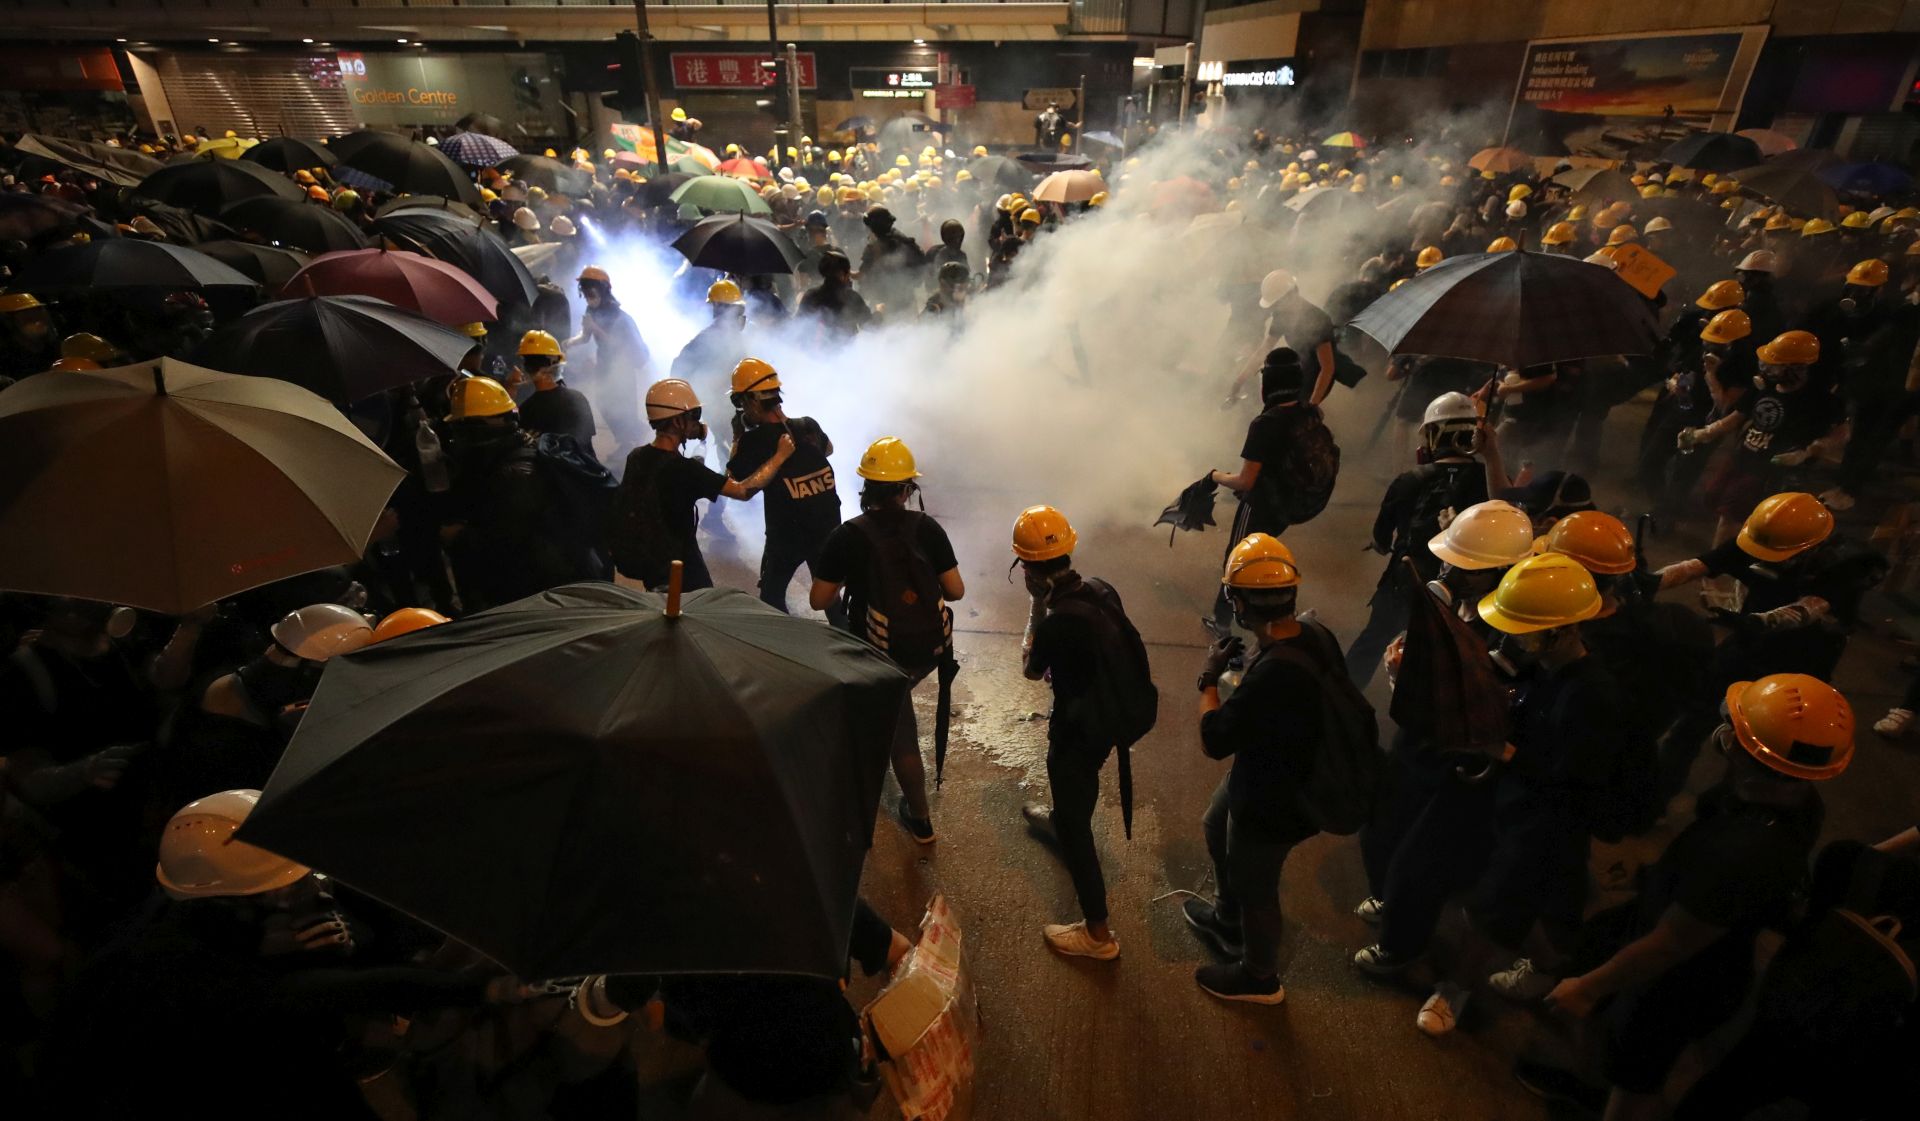 epa07745975 Anti-extradition bill protesters attend a rally against the police brutality in Hong Kong, China, 28 July 2019. Hong Kong has a new mass rally with demonstrators protesting against the police brutality on 27 July in Yuen Long, another mass protest was held and ended up with clashes between protesters and the police when riot police fired rubber bullets, tear gas and pepper spray to disperse the crowd.  EPA/RITCHIE B. TONGO